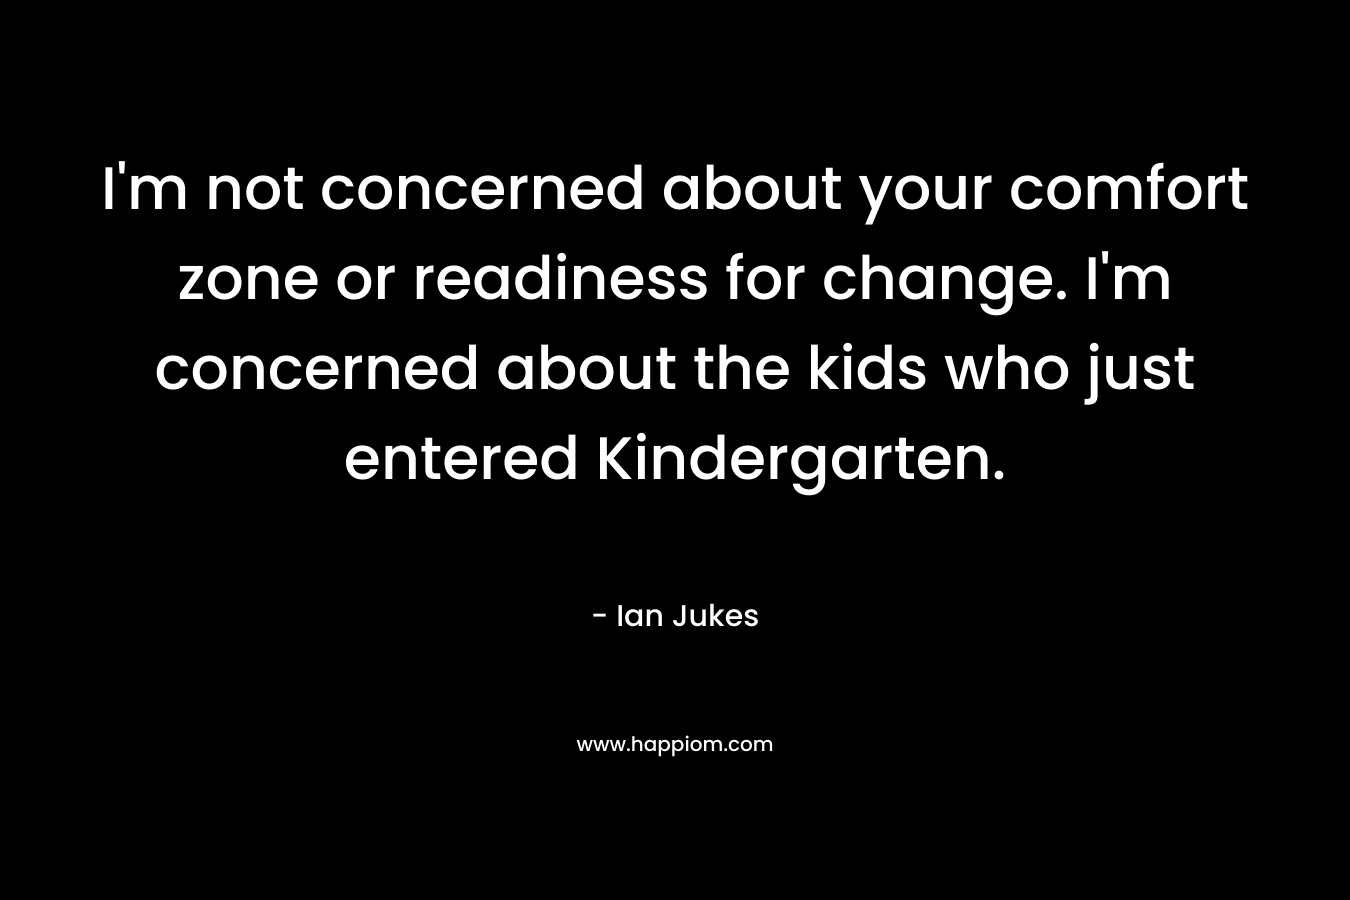 I'm not concerned about your comfort zone or readiness for change. I'm concerned about the kids who just entered Kindergarten.